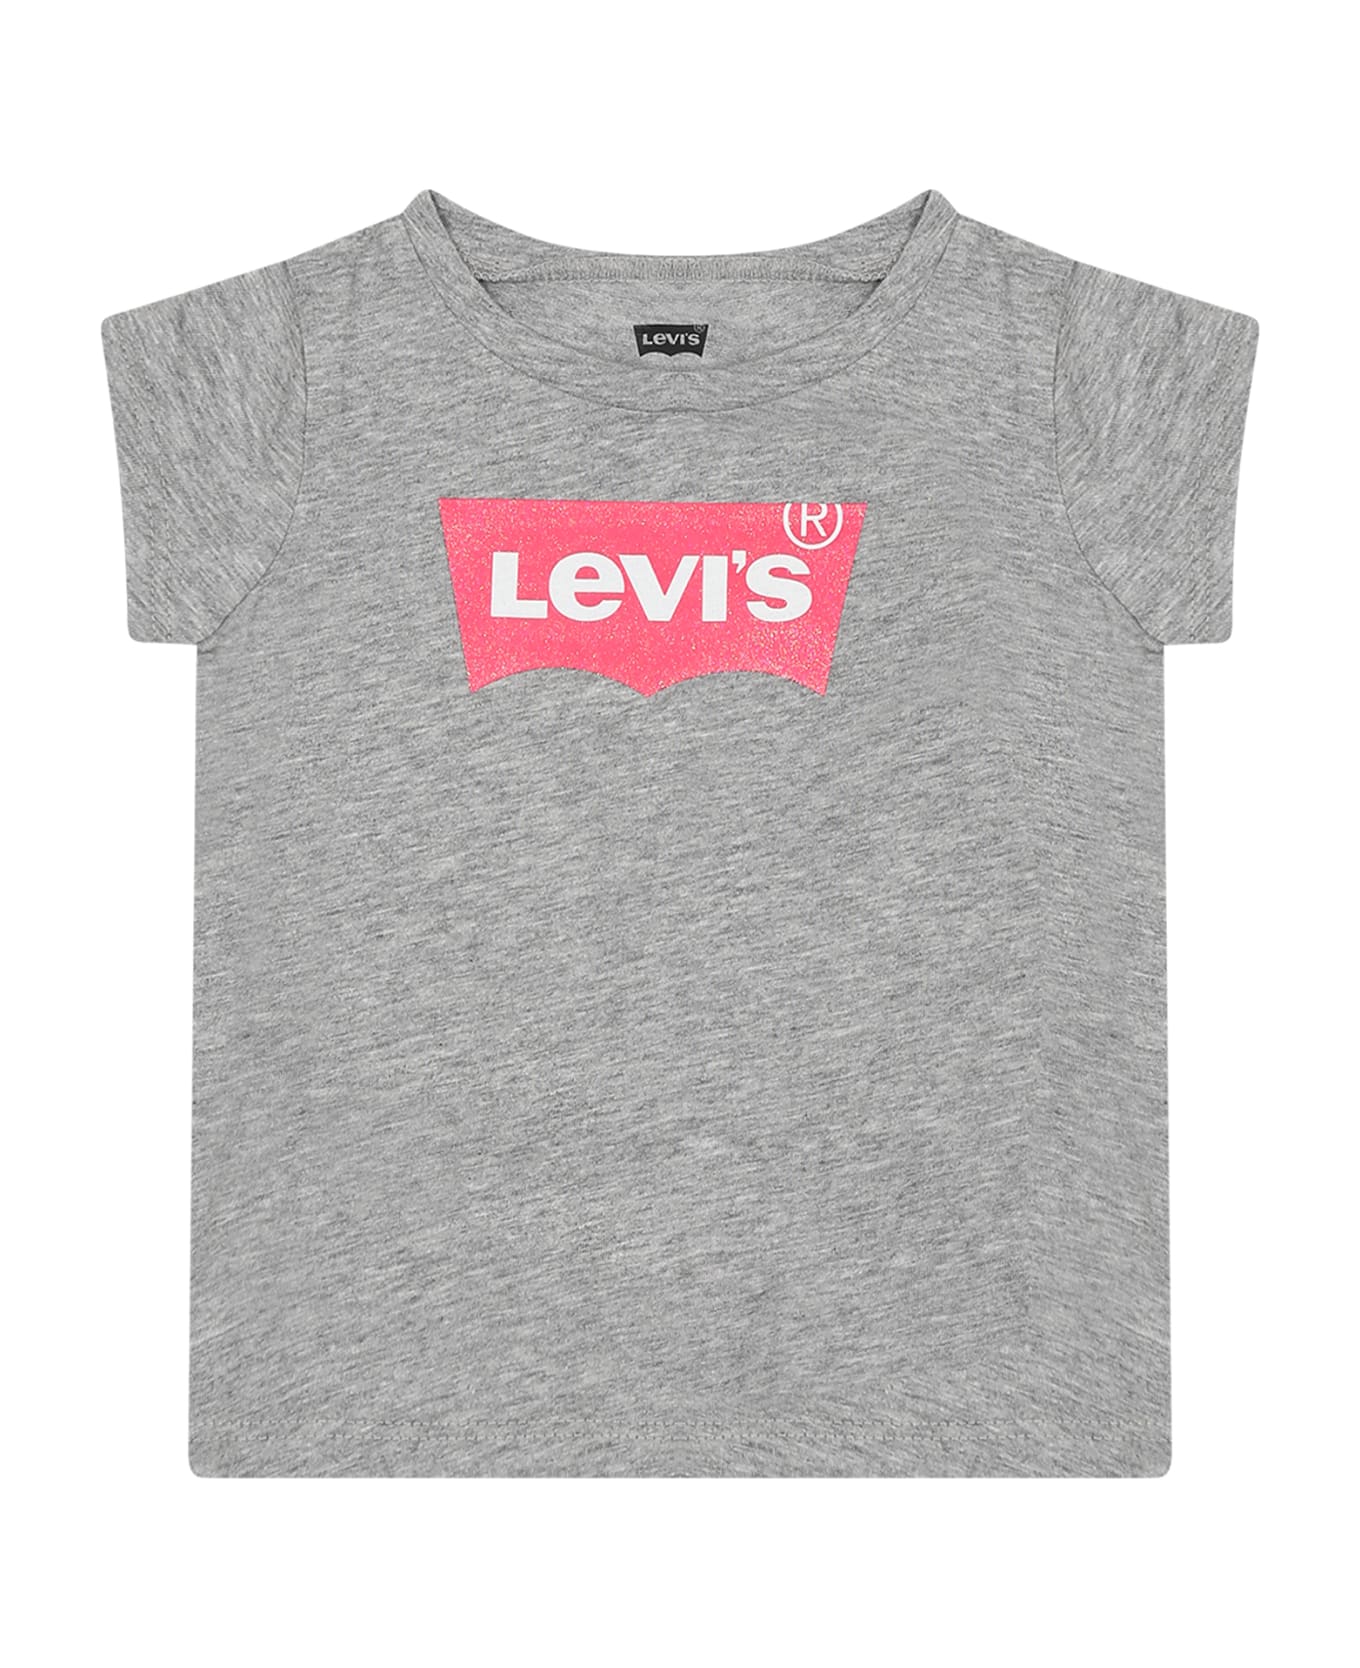 Levi's Grey T-shirt For Baby Girl With Logo - Grey